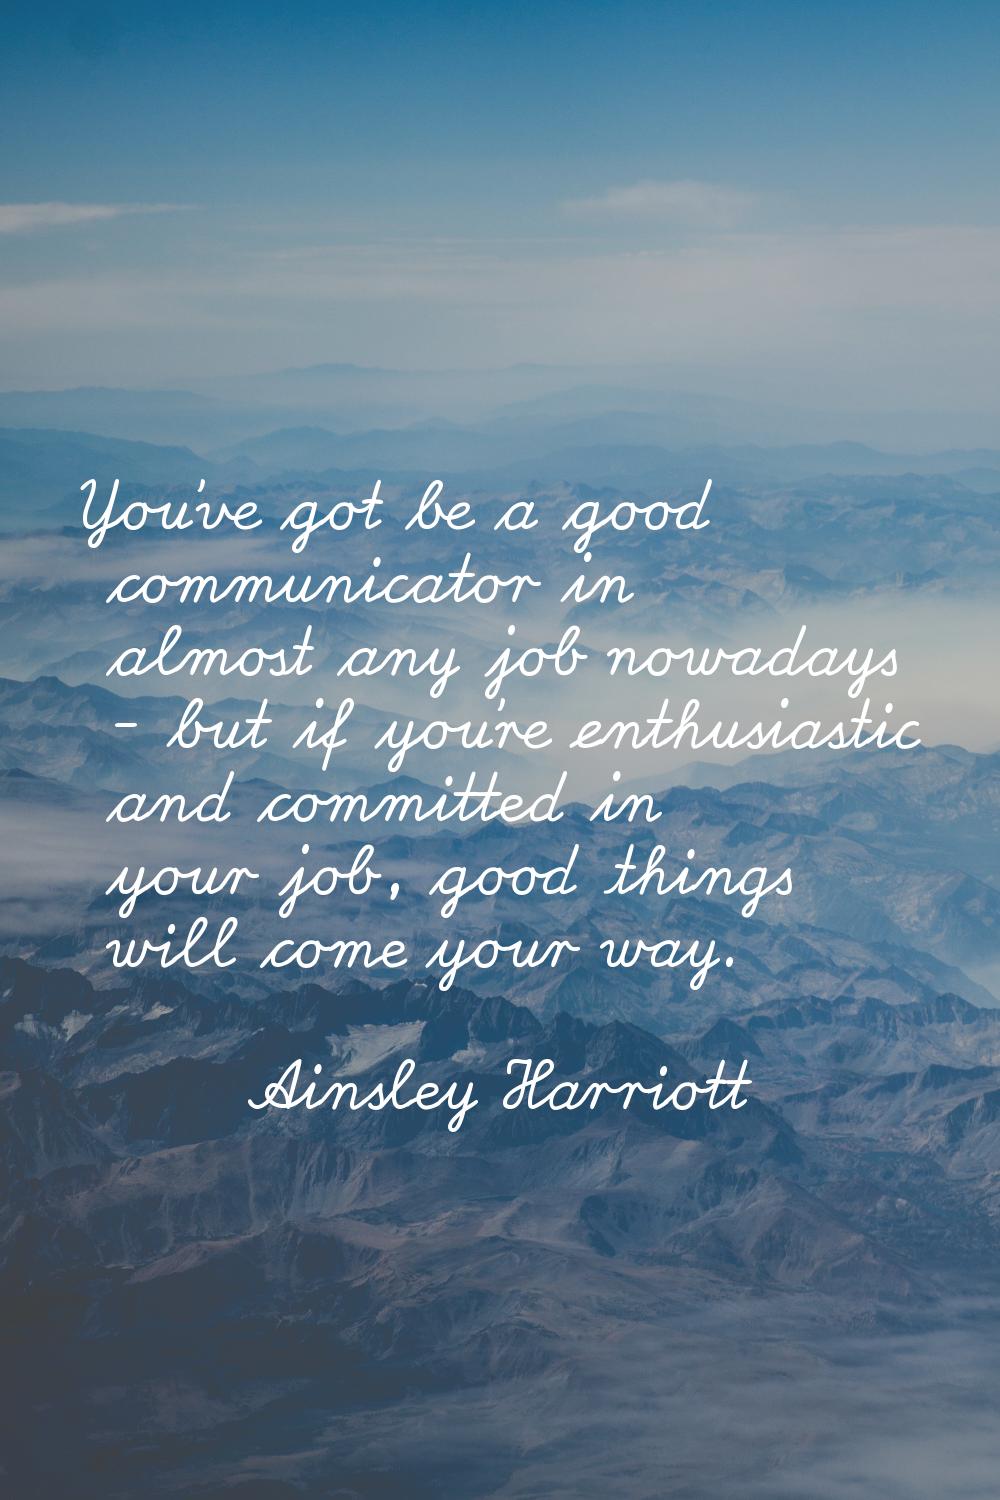 You've got be a good communicator in almost any job nowadays - but if you're enthusiastic and commi